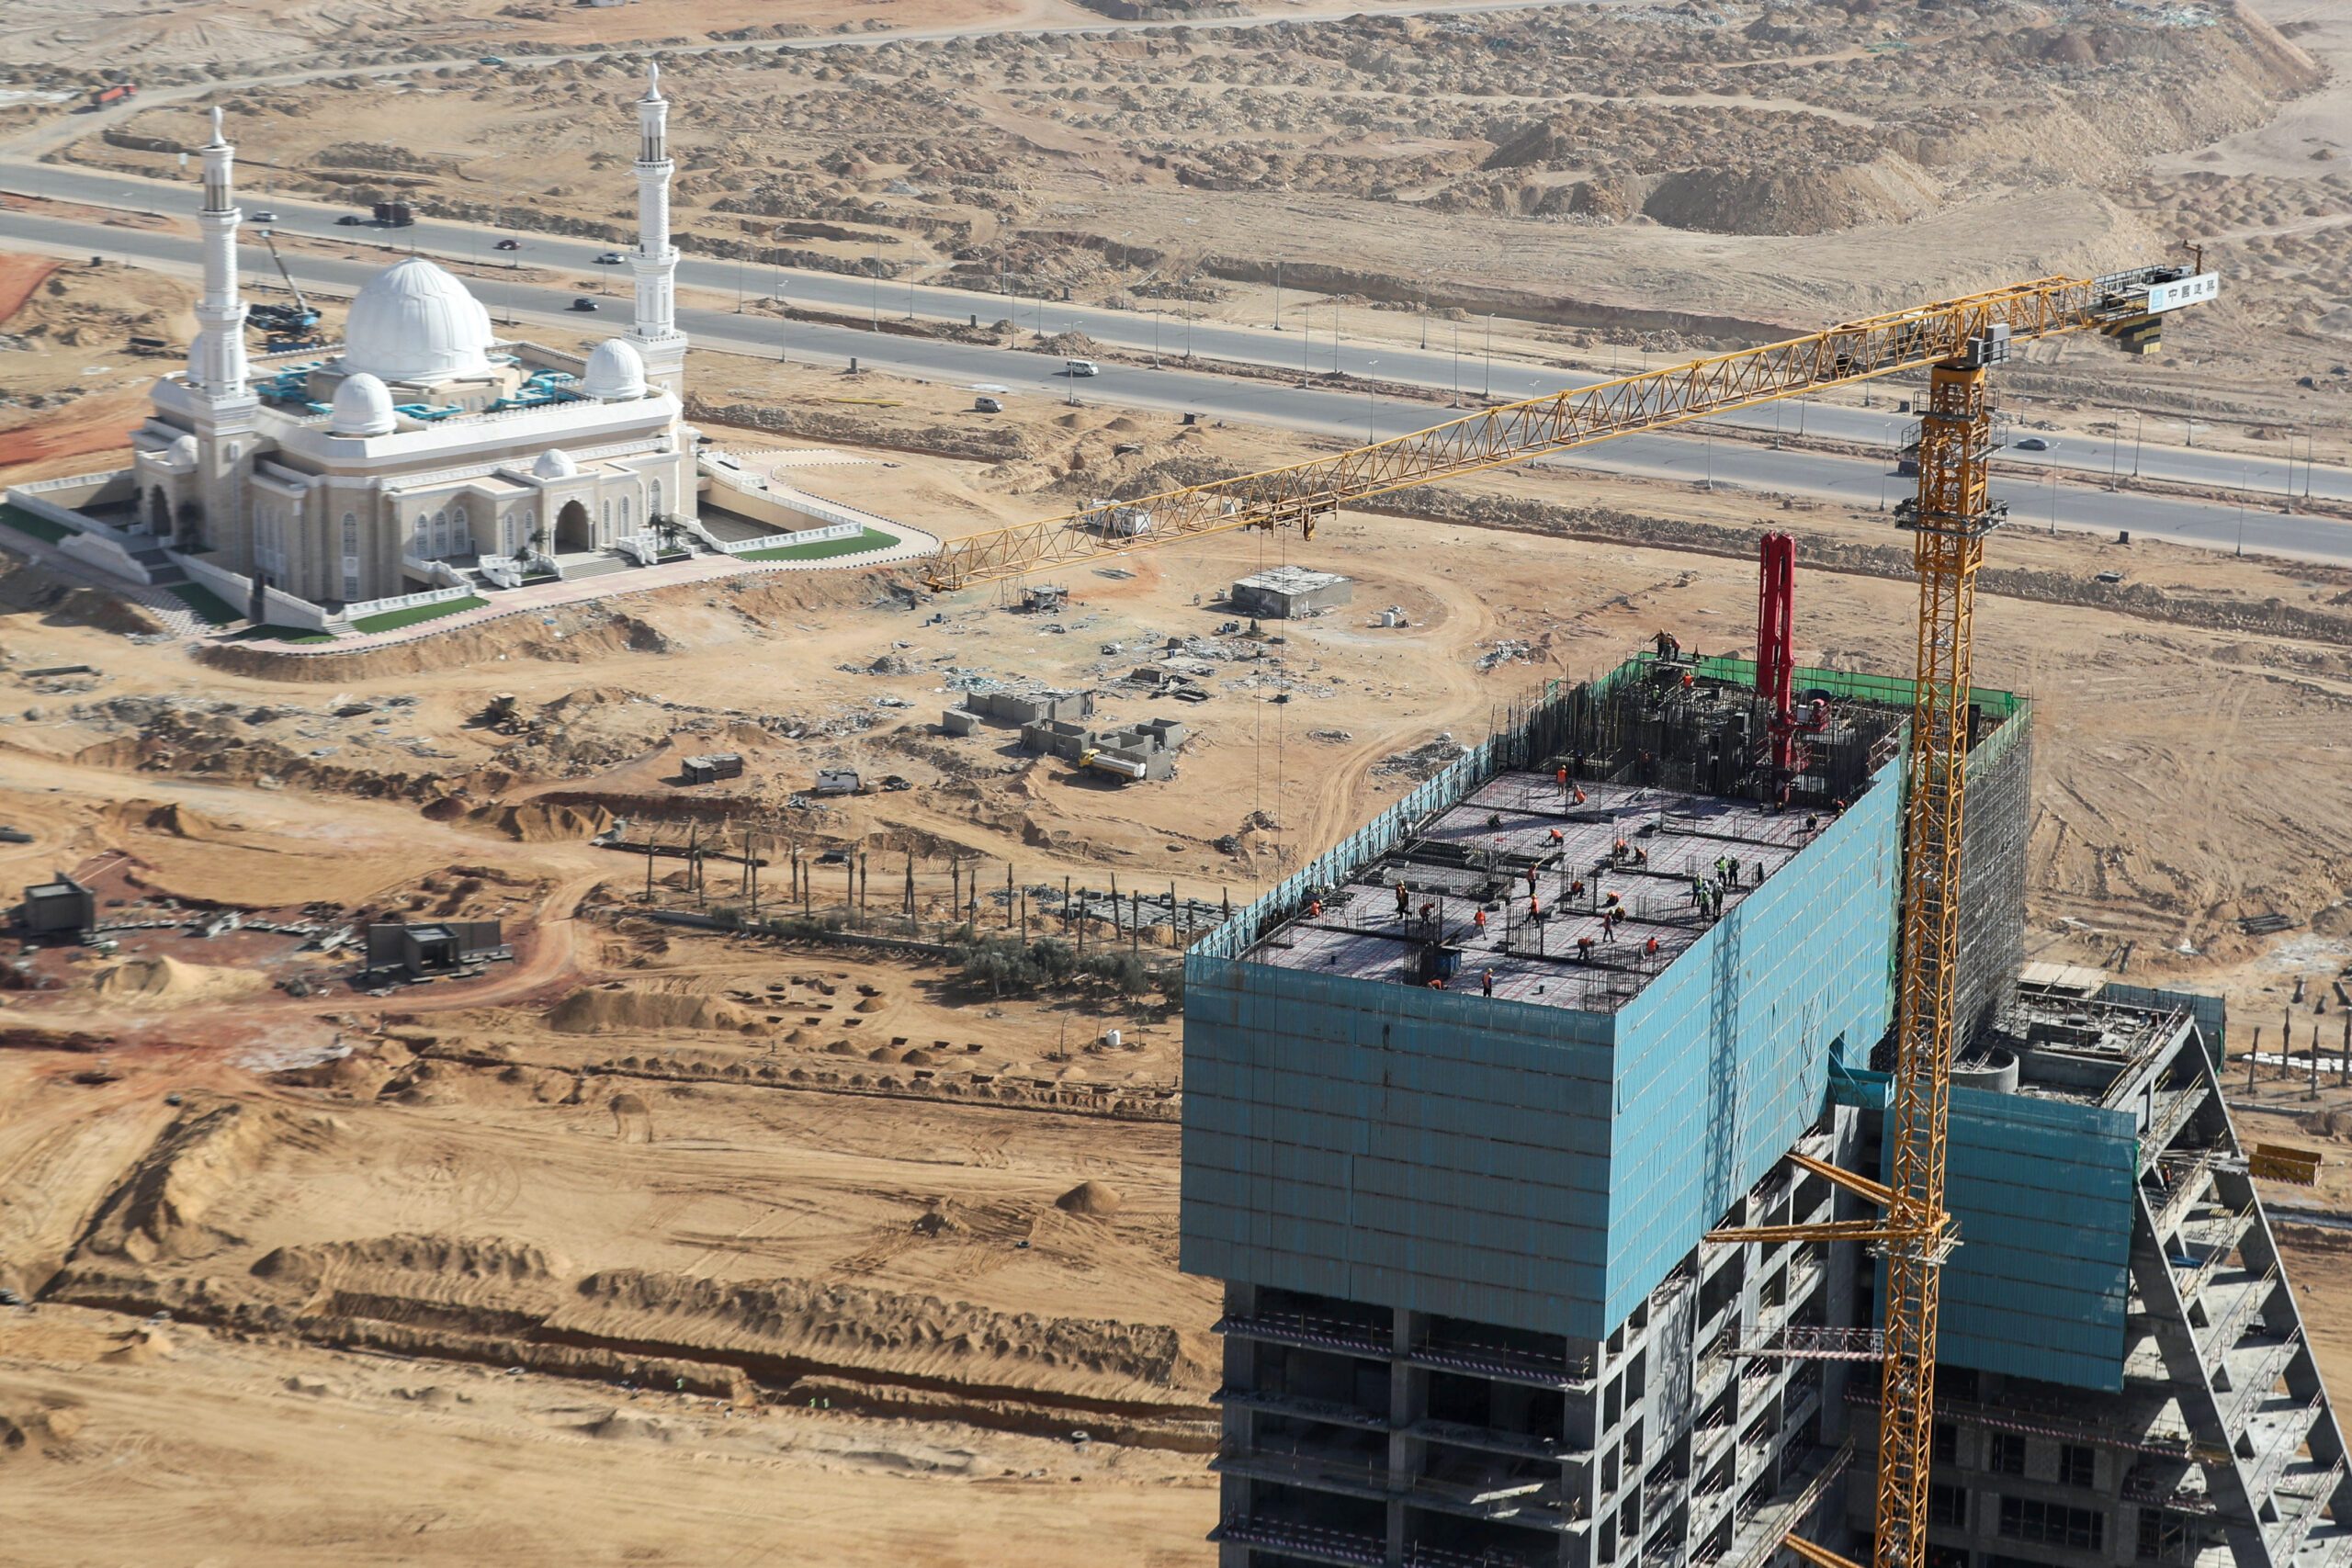 Construction work at Egypt's new administrative capital. Real estate 'is a very strong inflation hedge', says Aldar's Faisal Falaknaz